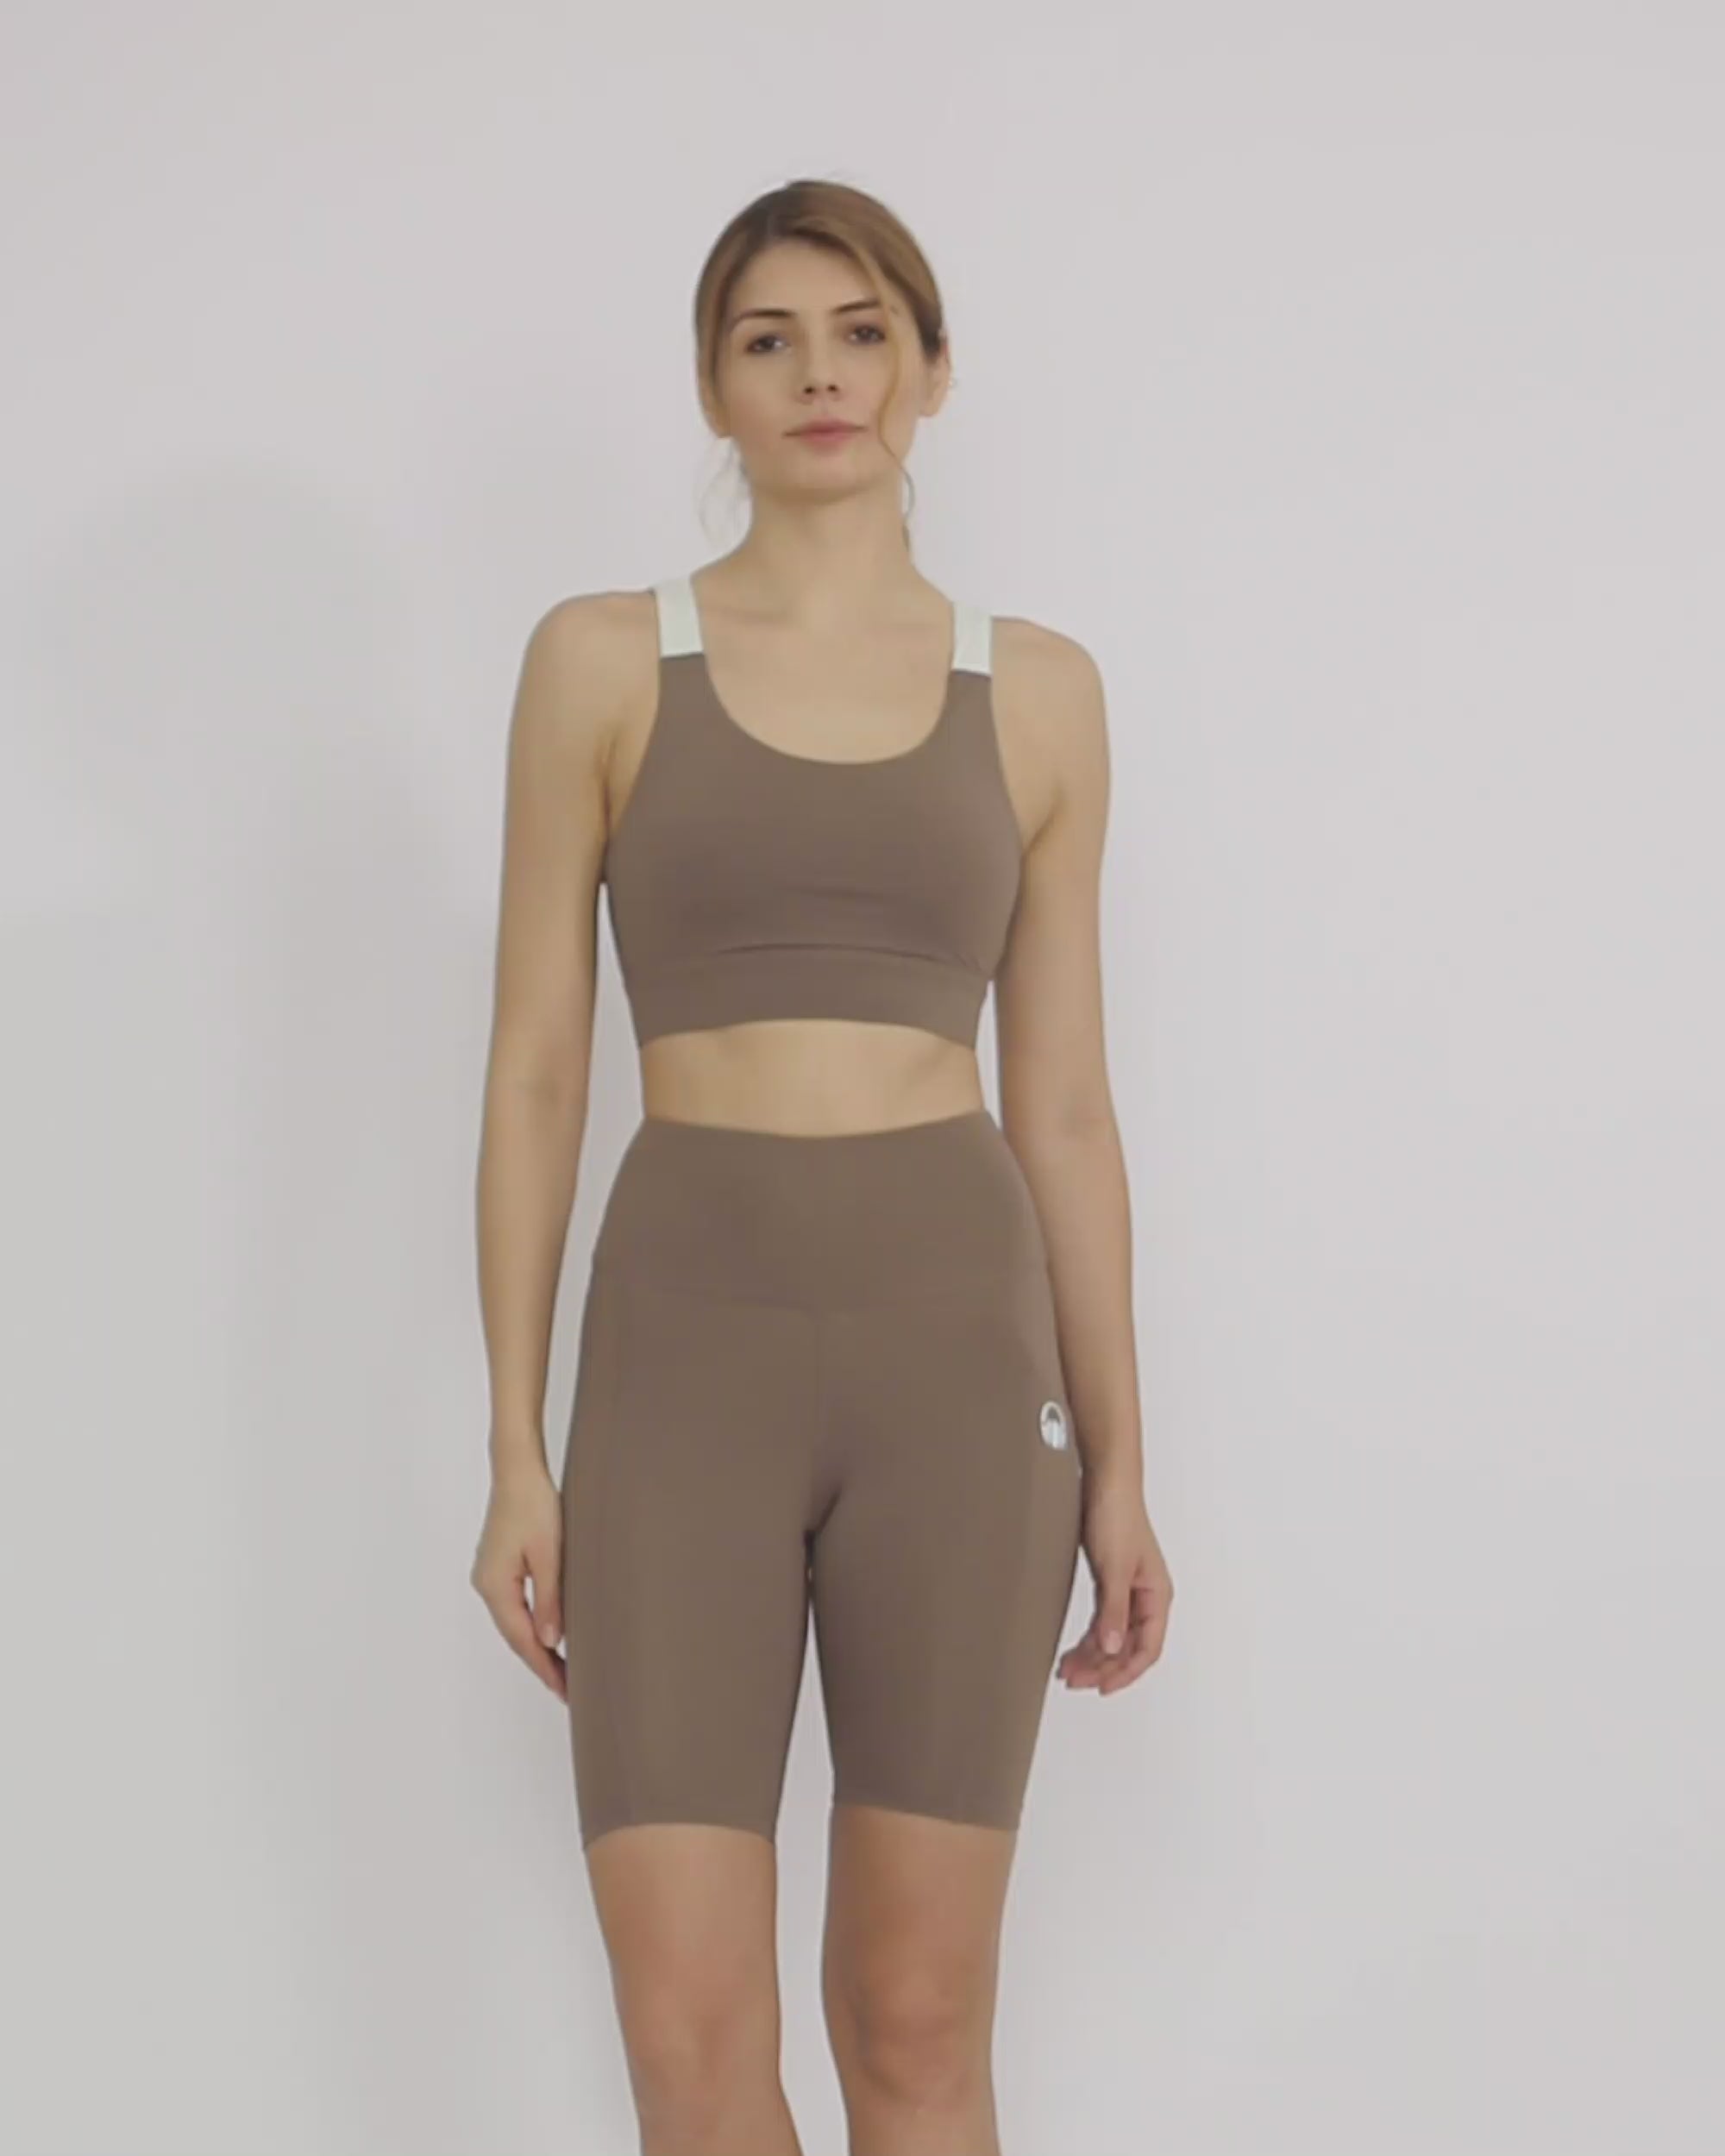 Nude Biker shorts and sports bra co-ord set by kosha yoga co from recycled materials